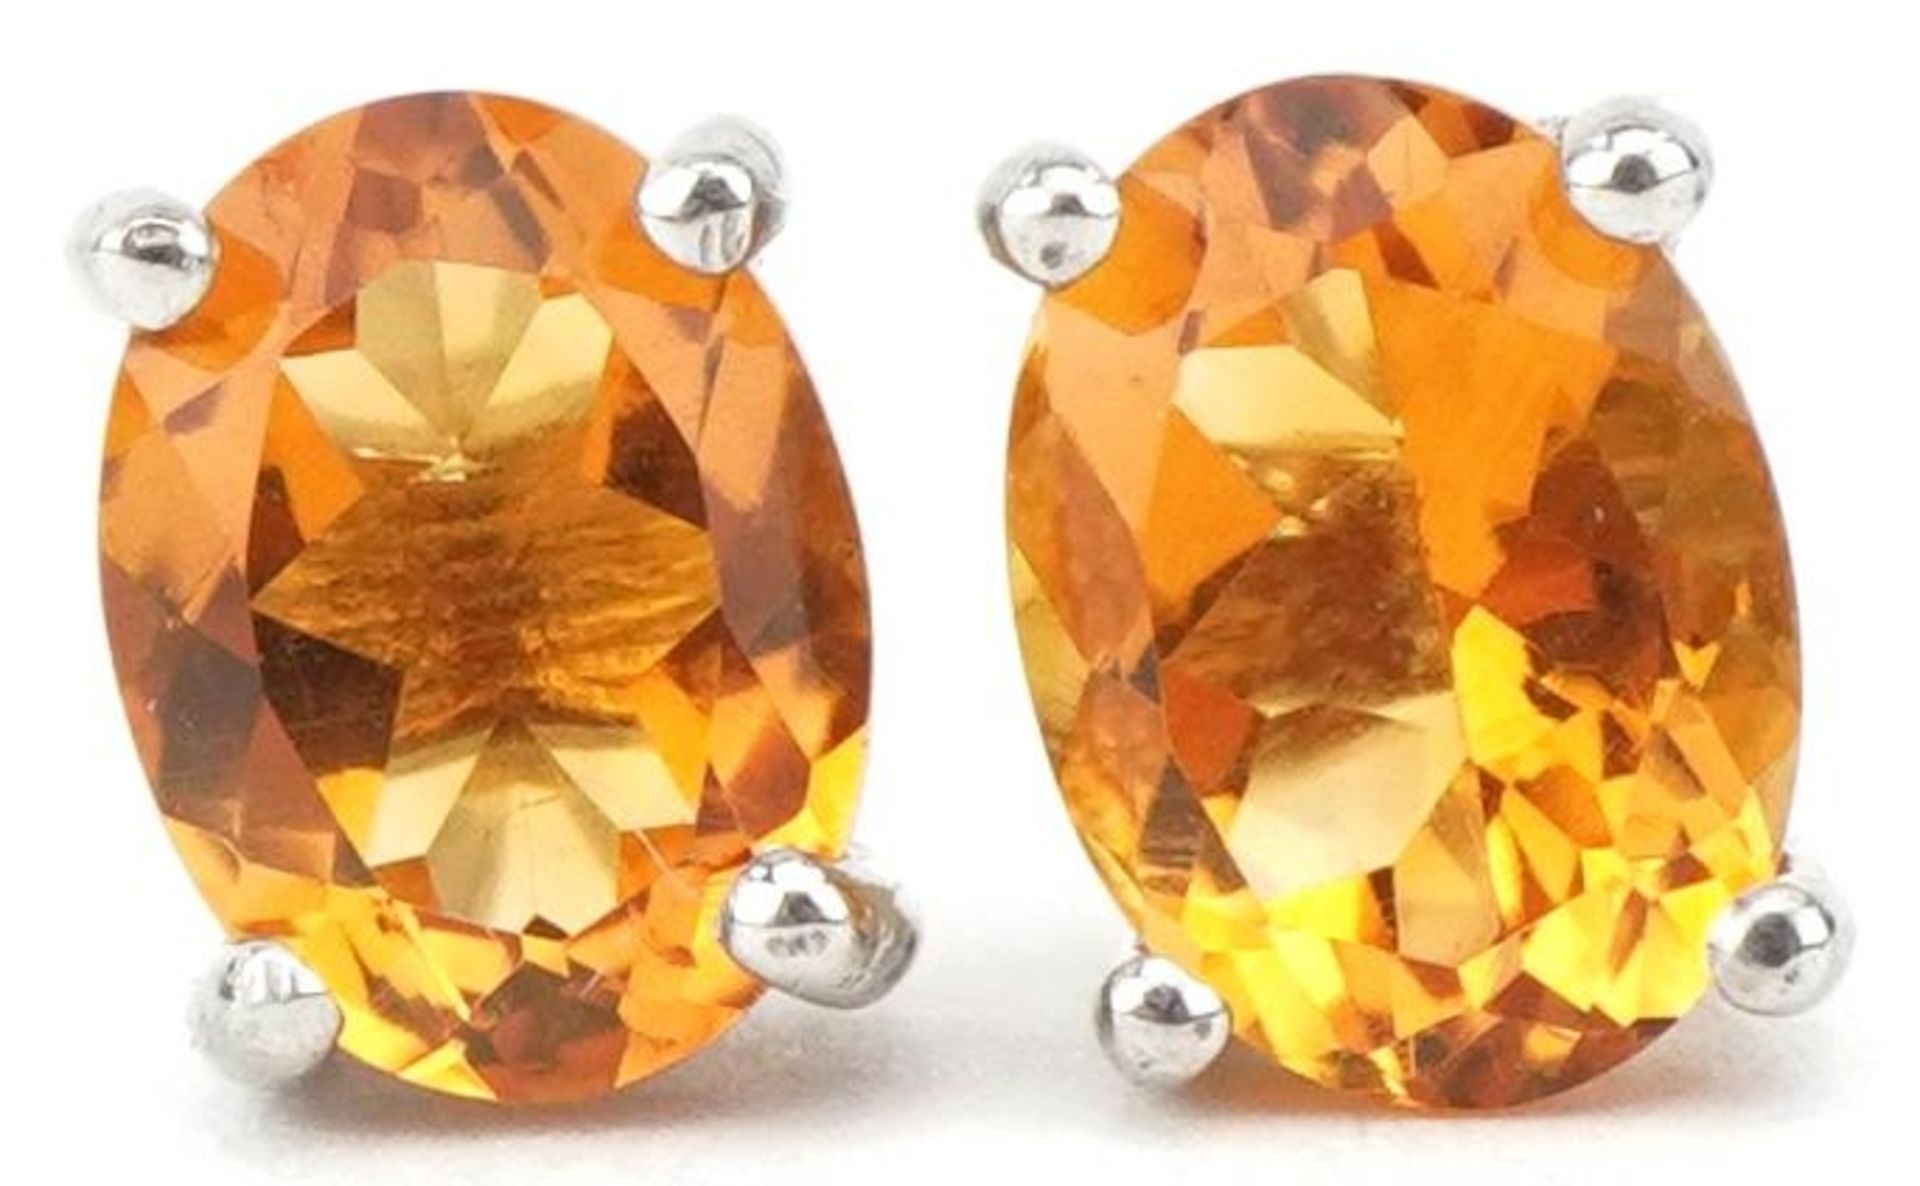 Pair of silver citrine stud earrings, 7.8mm high, 1.6g : For further information on this lot